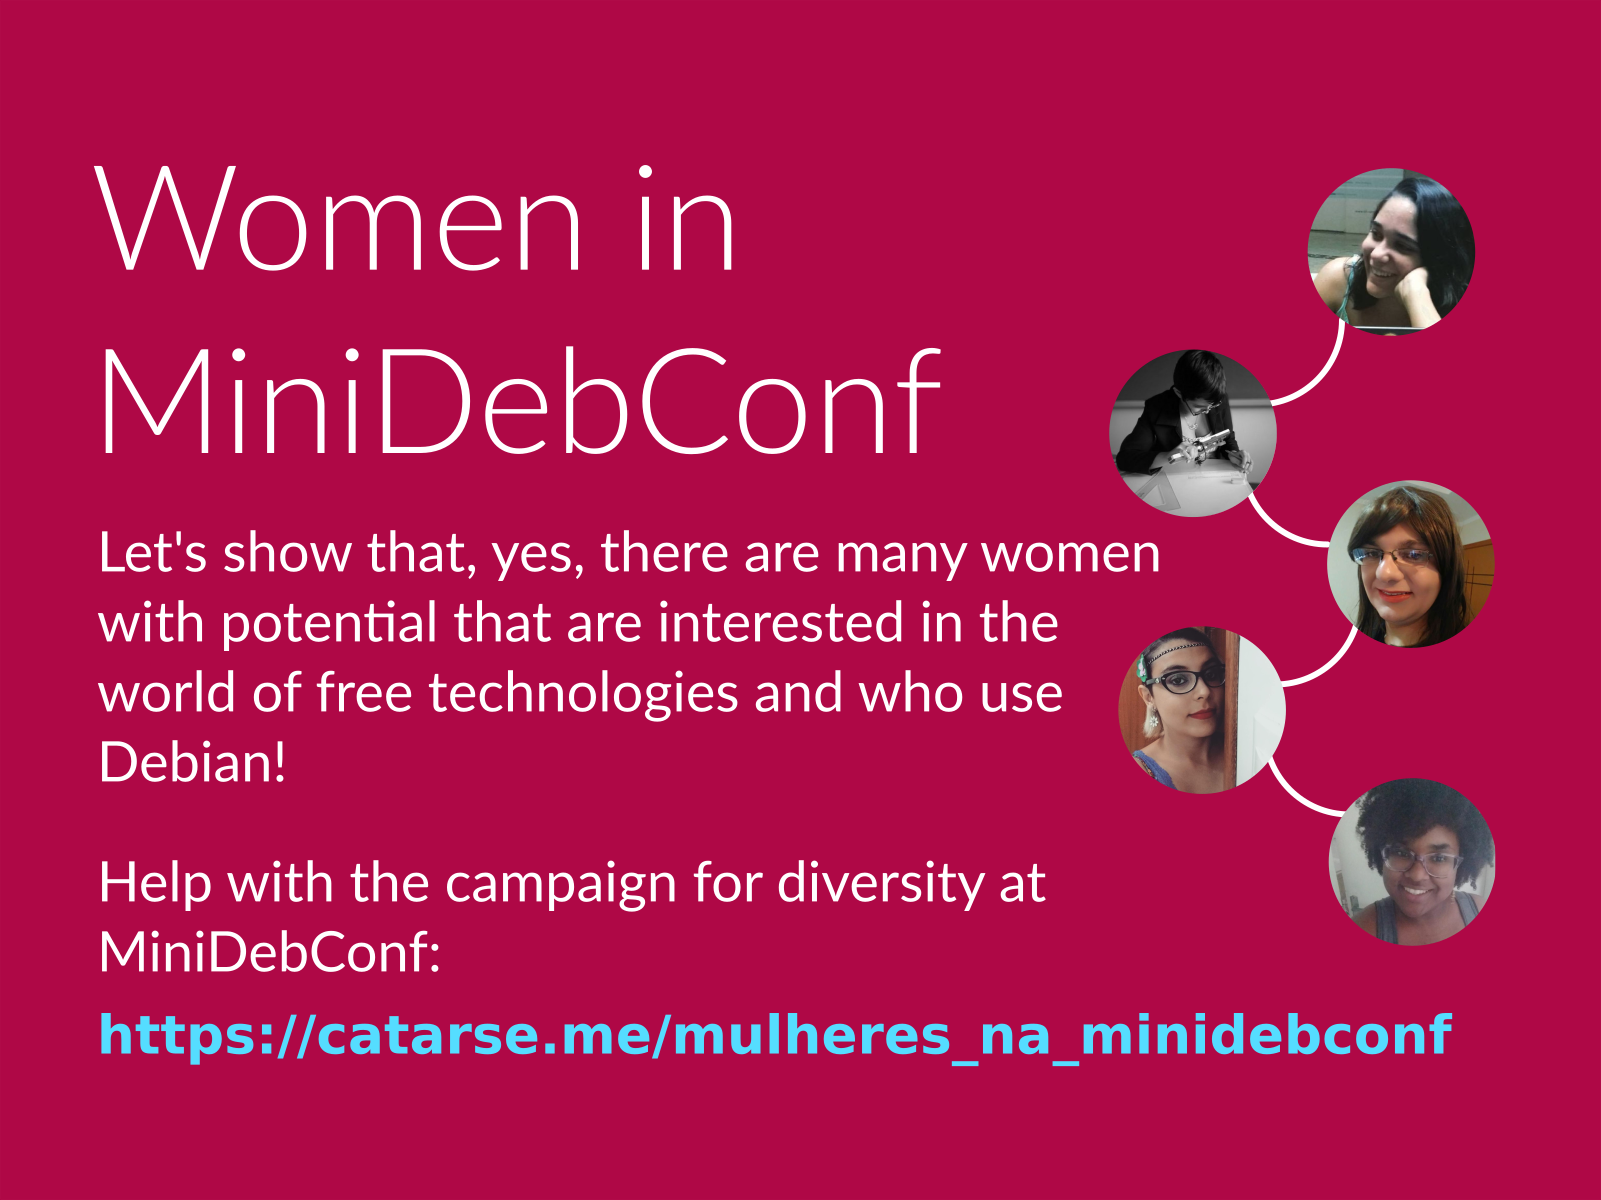 Women in MiniDebConf. Let's show that, yes, there are many women with potential that are interested in the world of free technologies and who use Debian! Help with the campaign for diversity at MiniDebConf: https://catarse.me/mulheres_na_minidebconf